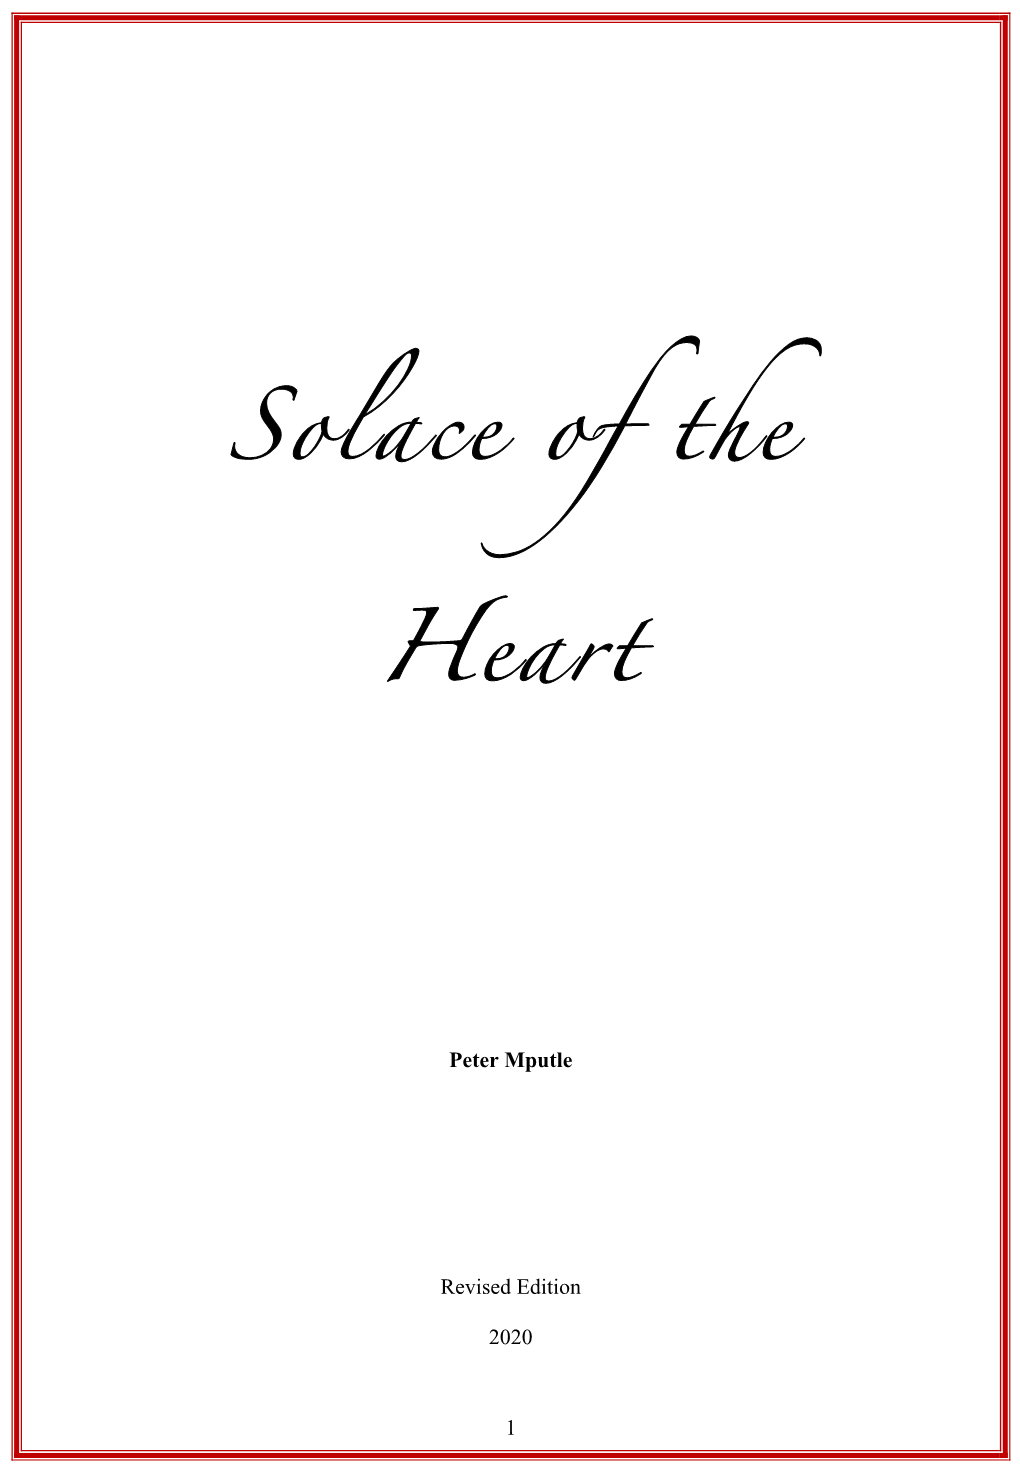 Solace of the Heart’